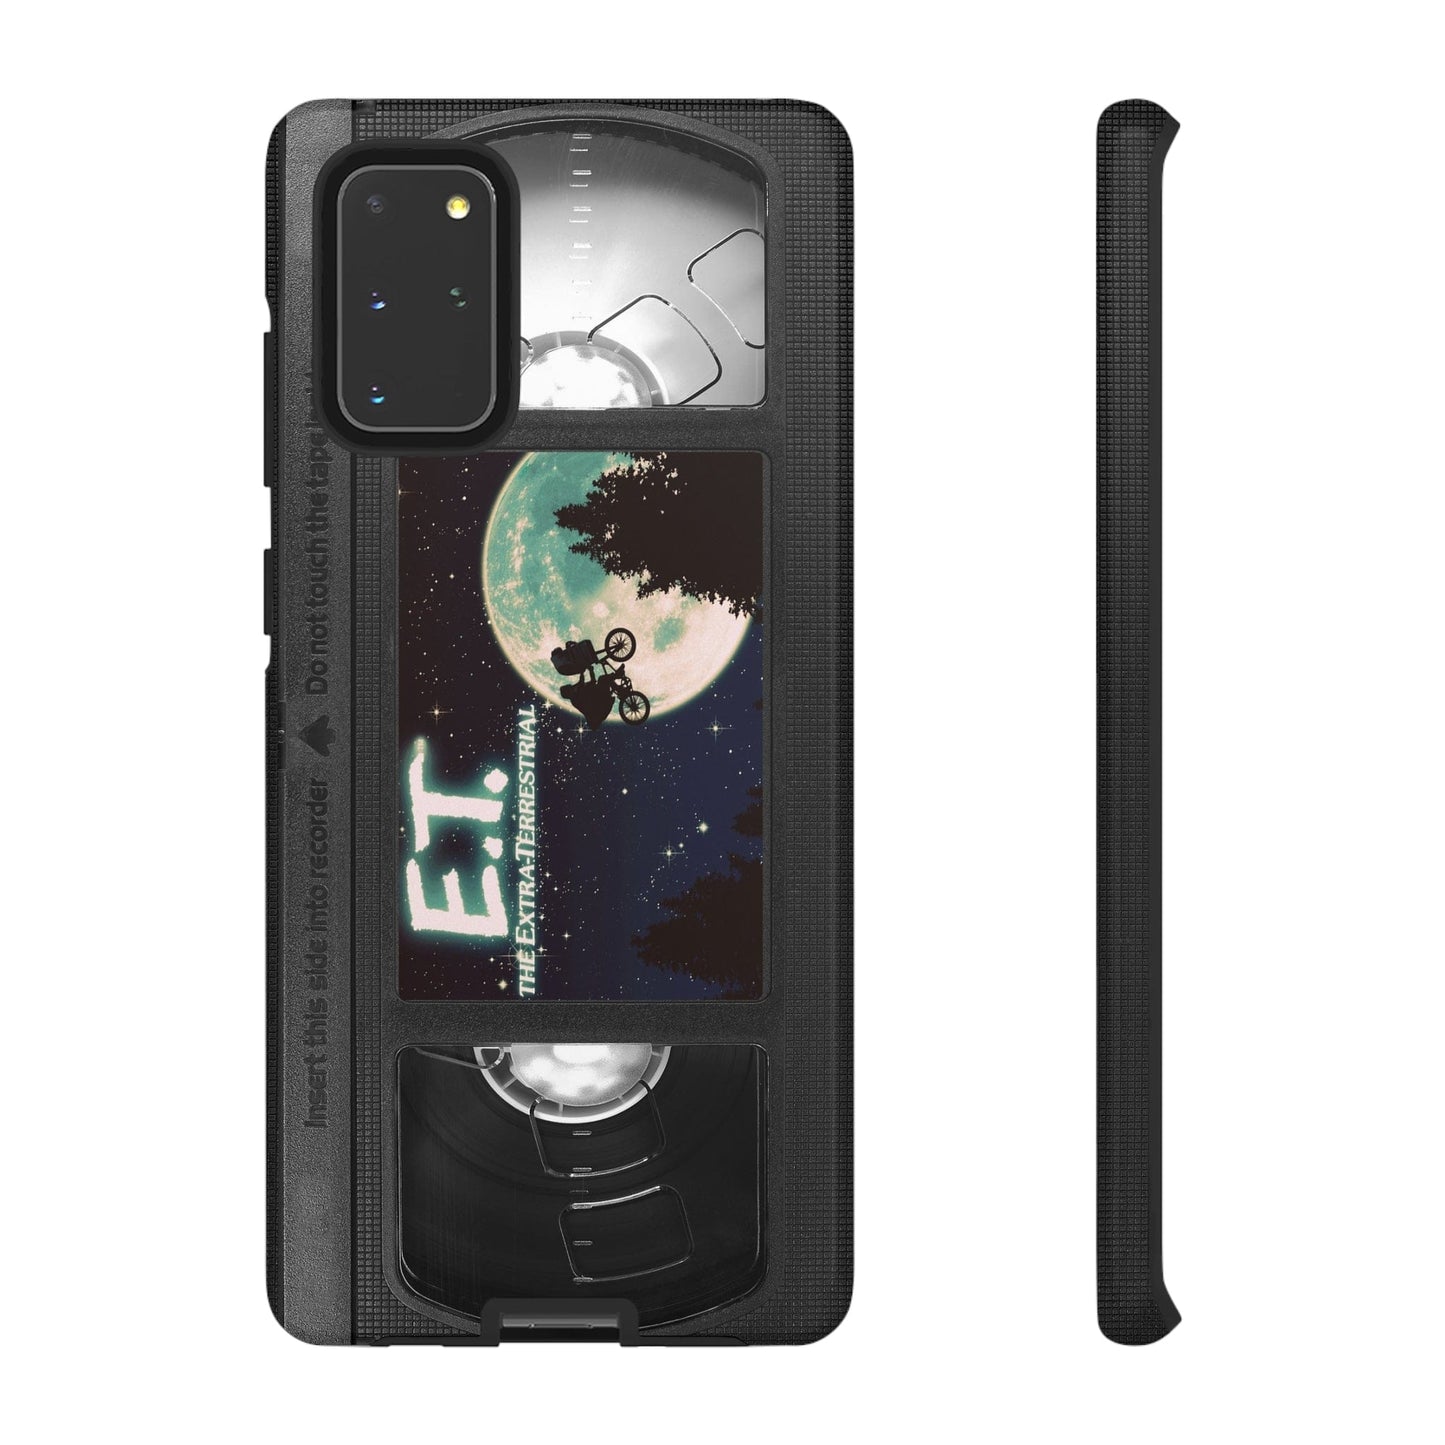 Extraterrestrial Impact Resistant VHS Phone Case